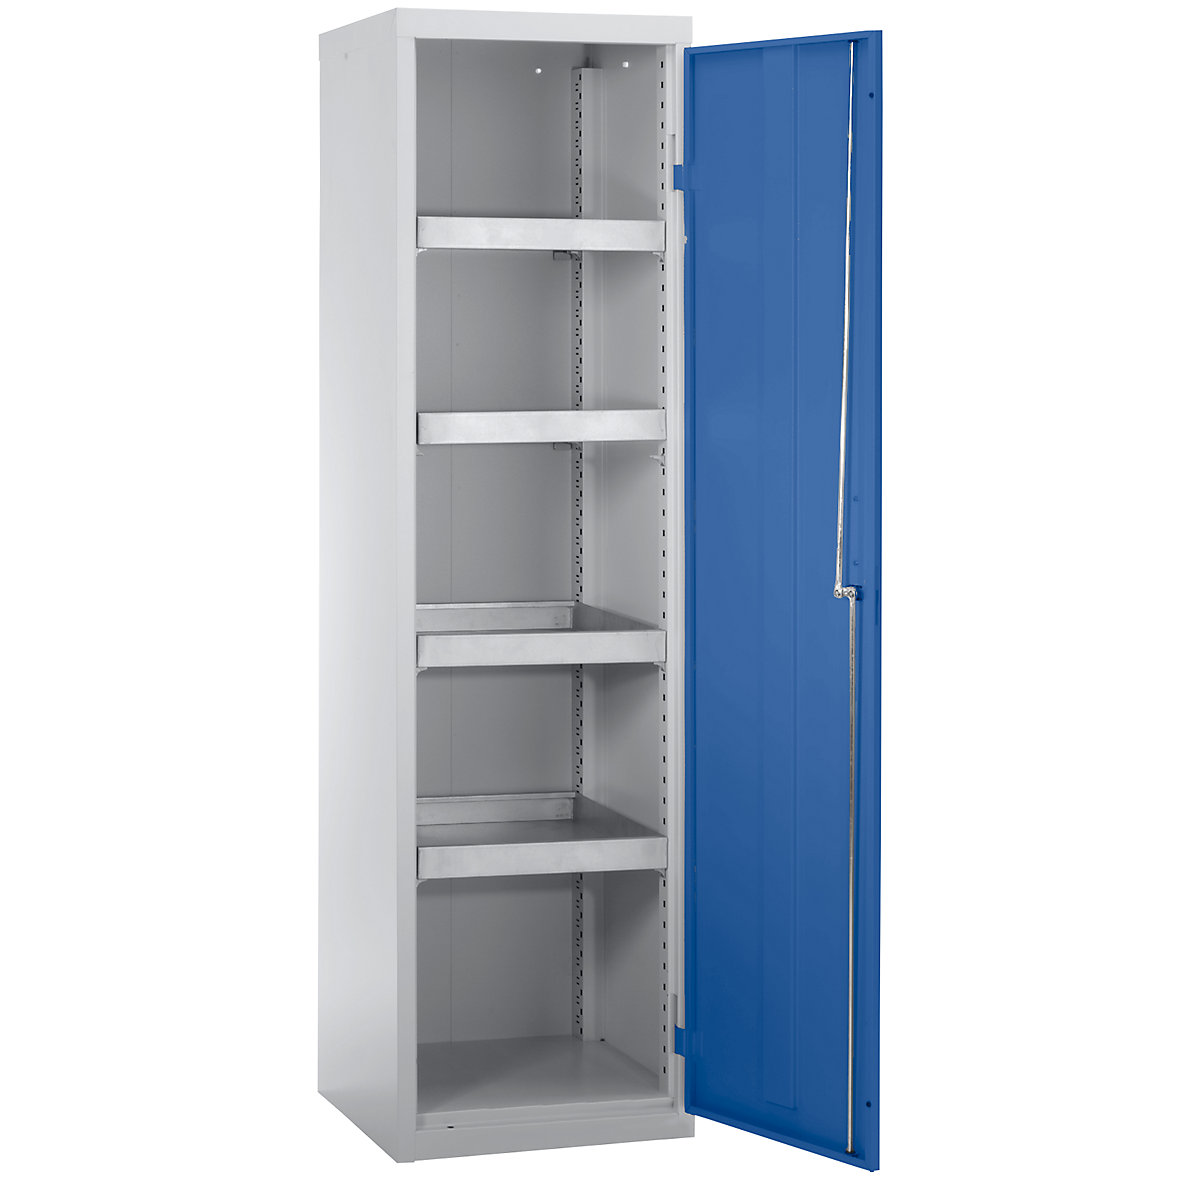 Environmental cupboard without door perforations